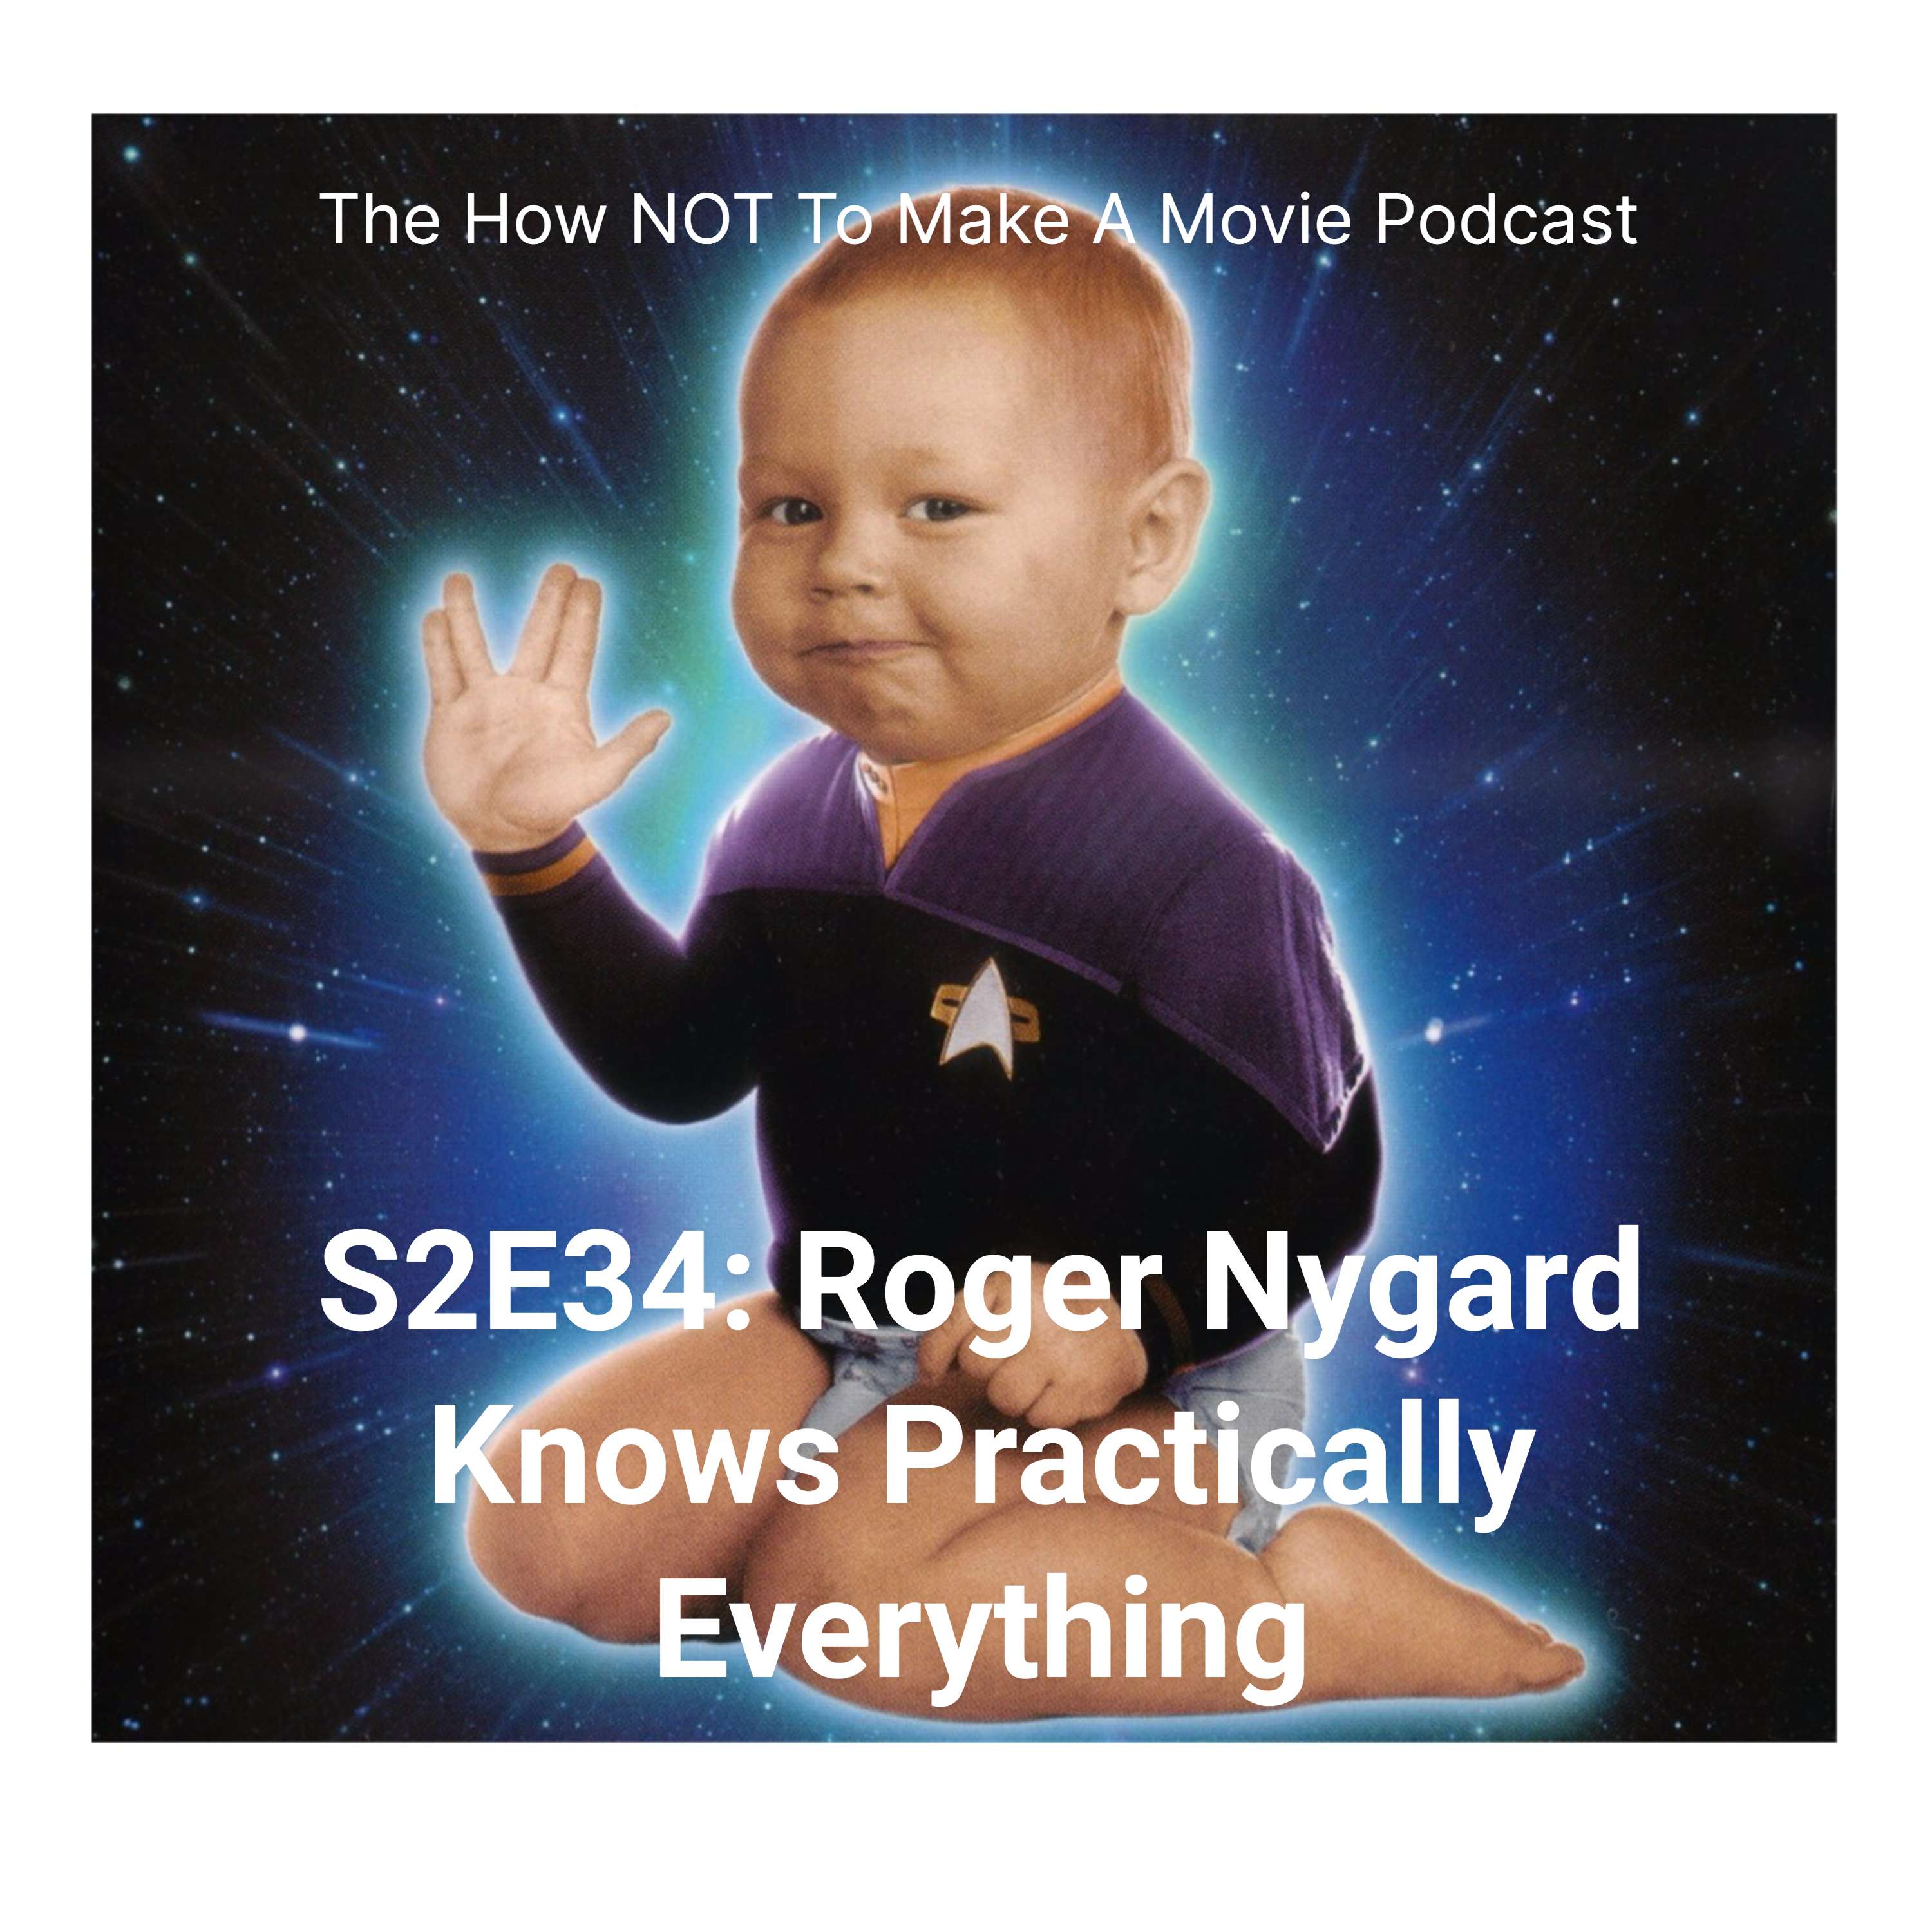 S2E34: Roger Nygard Knows Practically Everything